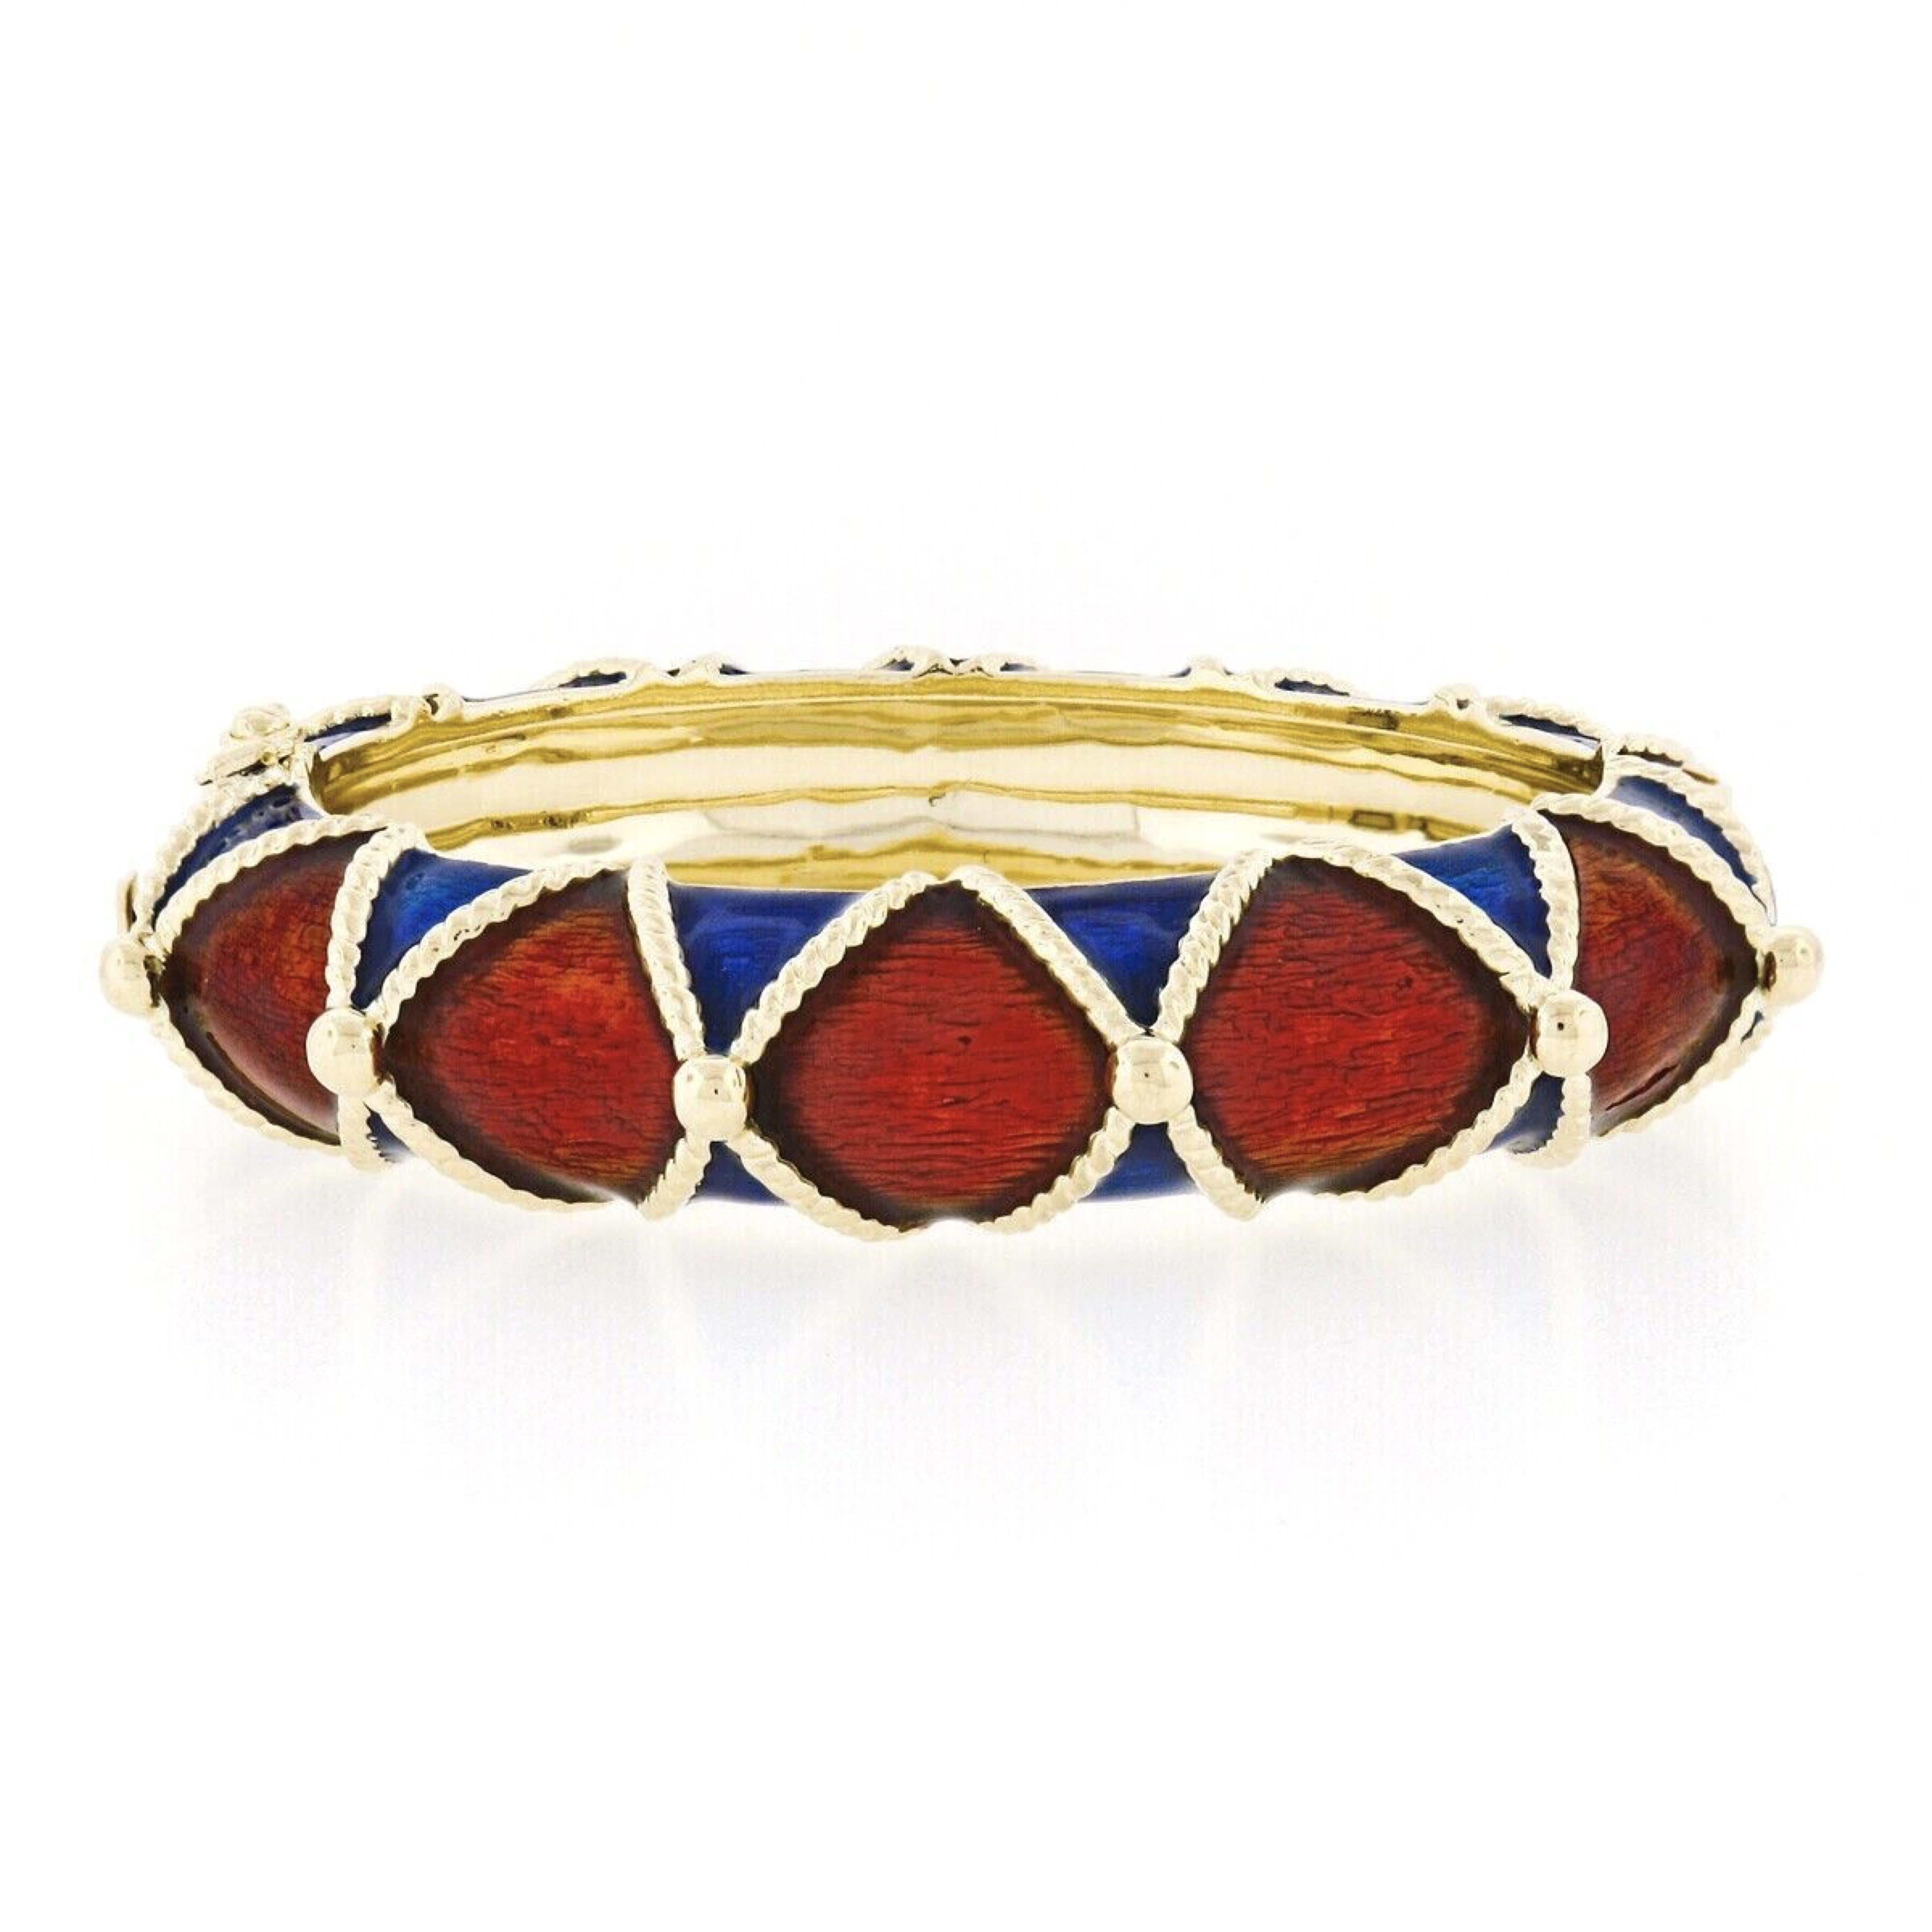 This substantial vintage bangle bracelet is well crafted in solid 14k yellow gold and features wide domed design decorated with gorgeous brownish-red enamel along the center and royal blue enamel all around the sides. The fine enamel covers and